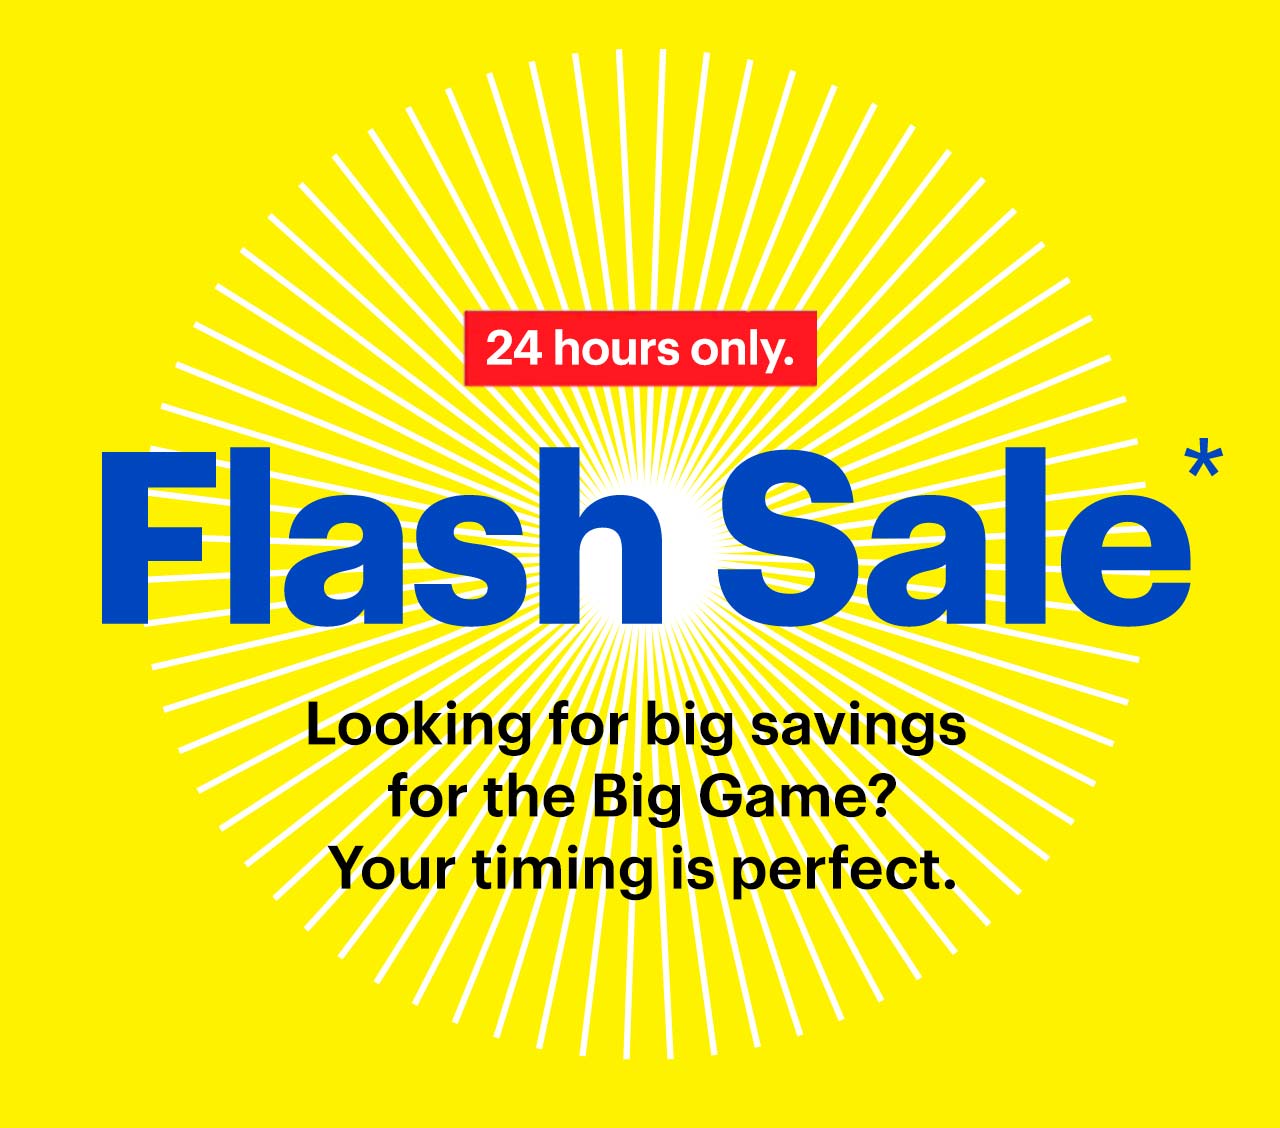 Flash Sale. Looking for big savings for the Big Game? Your timing is perfect. 24 hours only. Reference disclaimer.